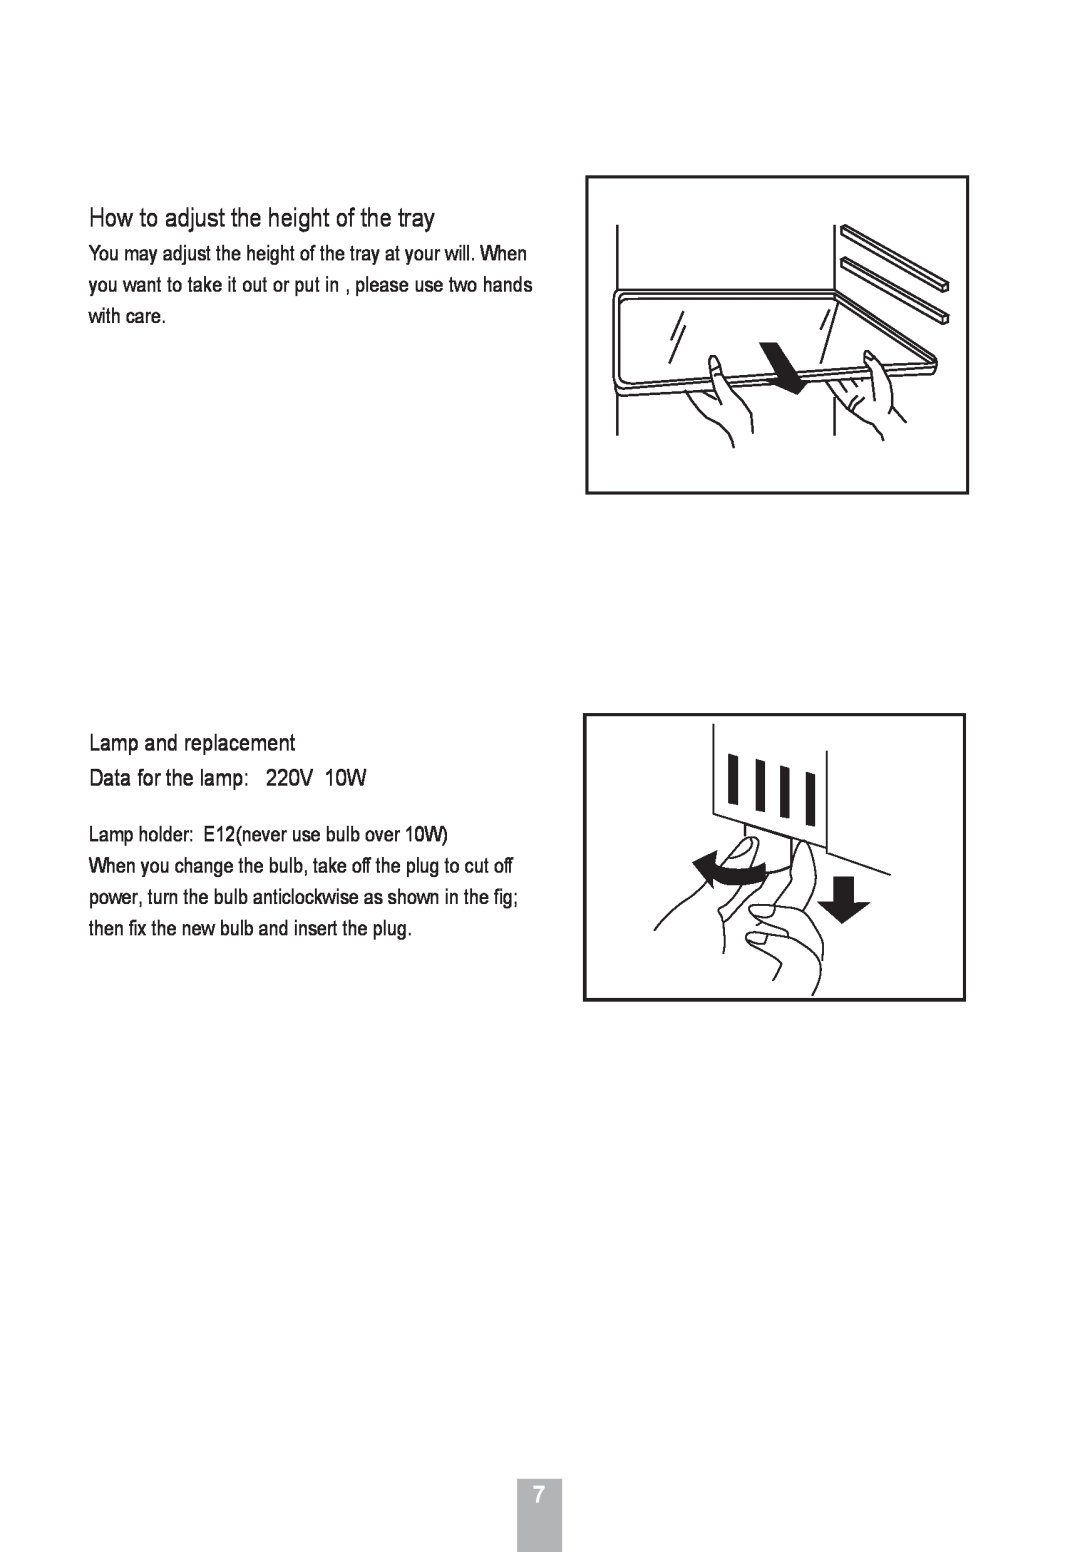 Haier HRF-155, HRF-185 manual How to adjust the height of the tray, Lamp and replacement Data for the lamp 220V 10W 